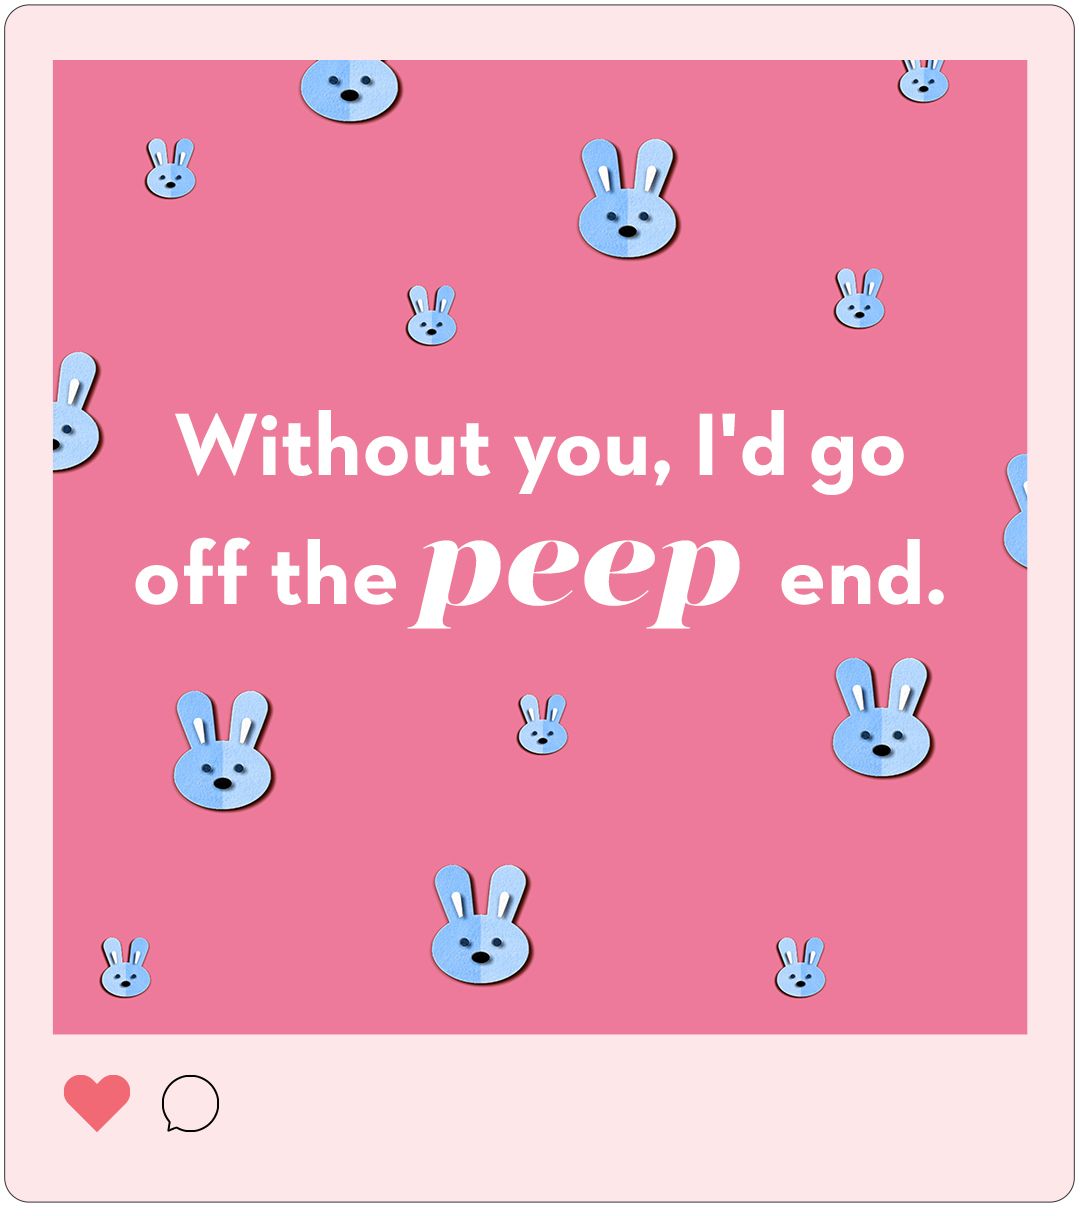 100+ Funny Instagram Captions for Girls - TurboFuture